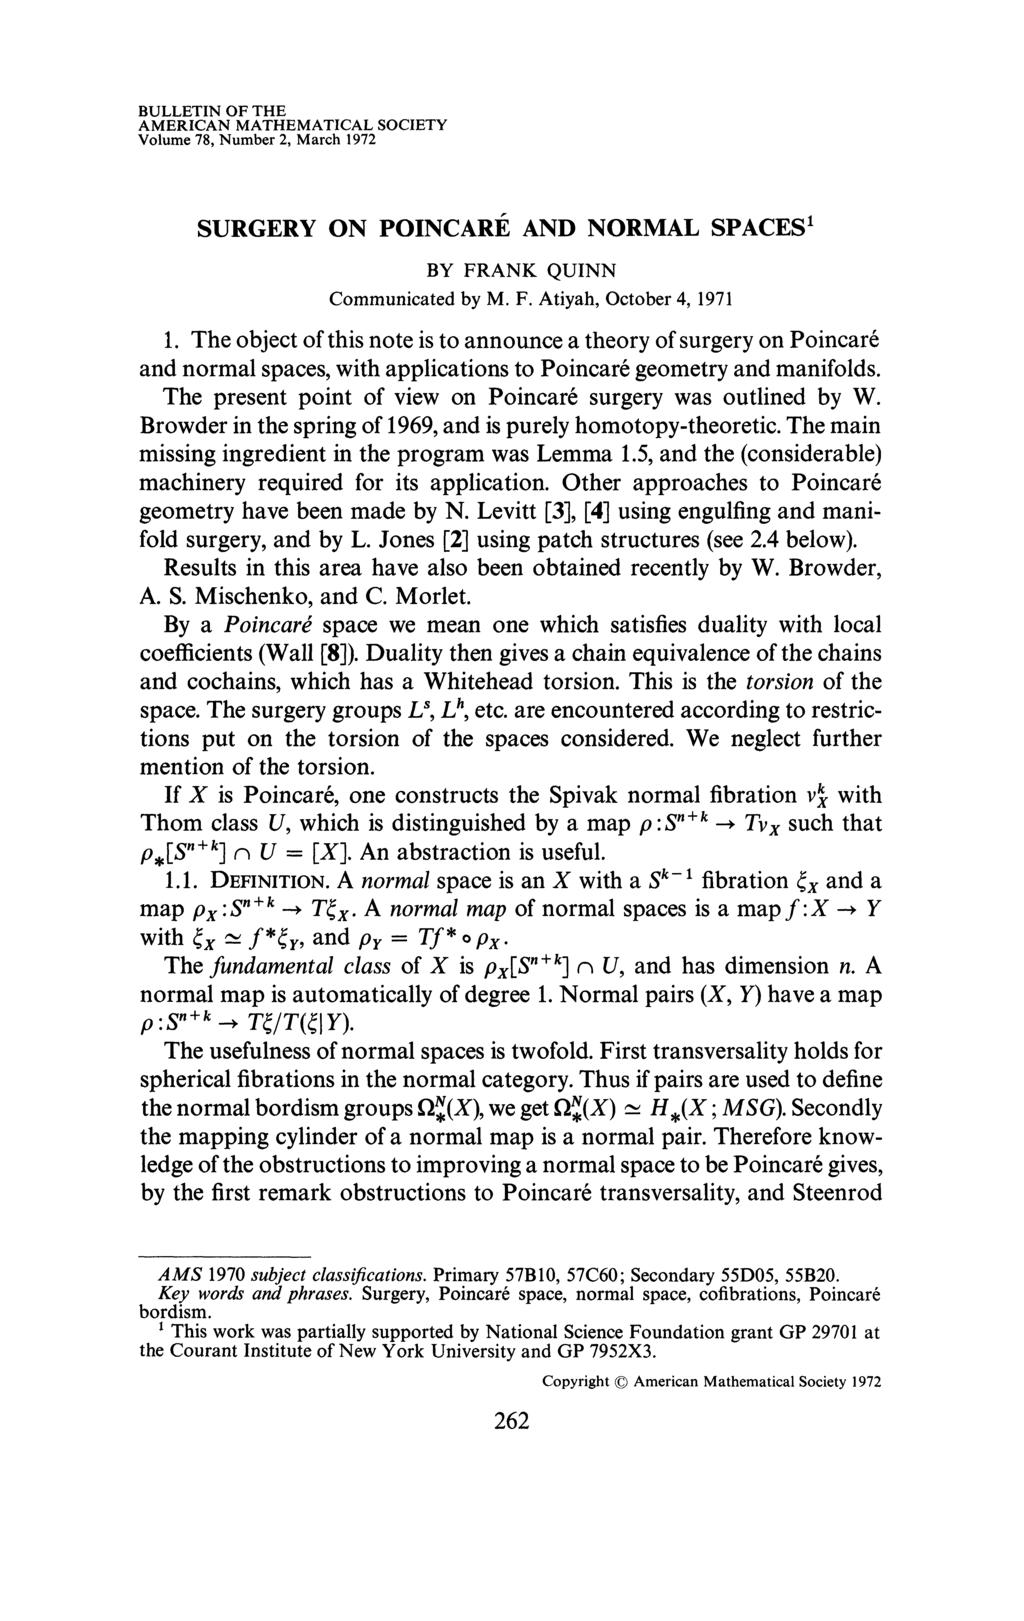 BULLETIN OF THE AMERICAN MATHEMATICAL SOCIETY Volume 78, Number 2, March 1972 SURGERY ON POINCARÉ AND NORMAL SPACES 1 BY FRANK QUINN Communicated by M. F. Atiyah, October 4, 1971 1.